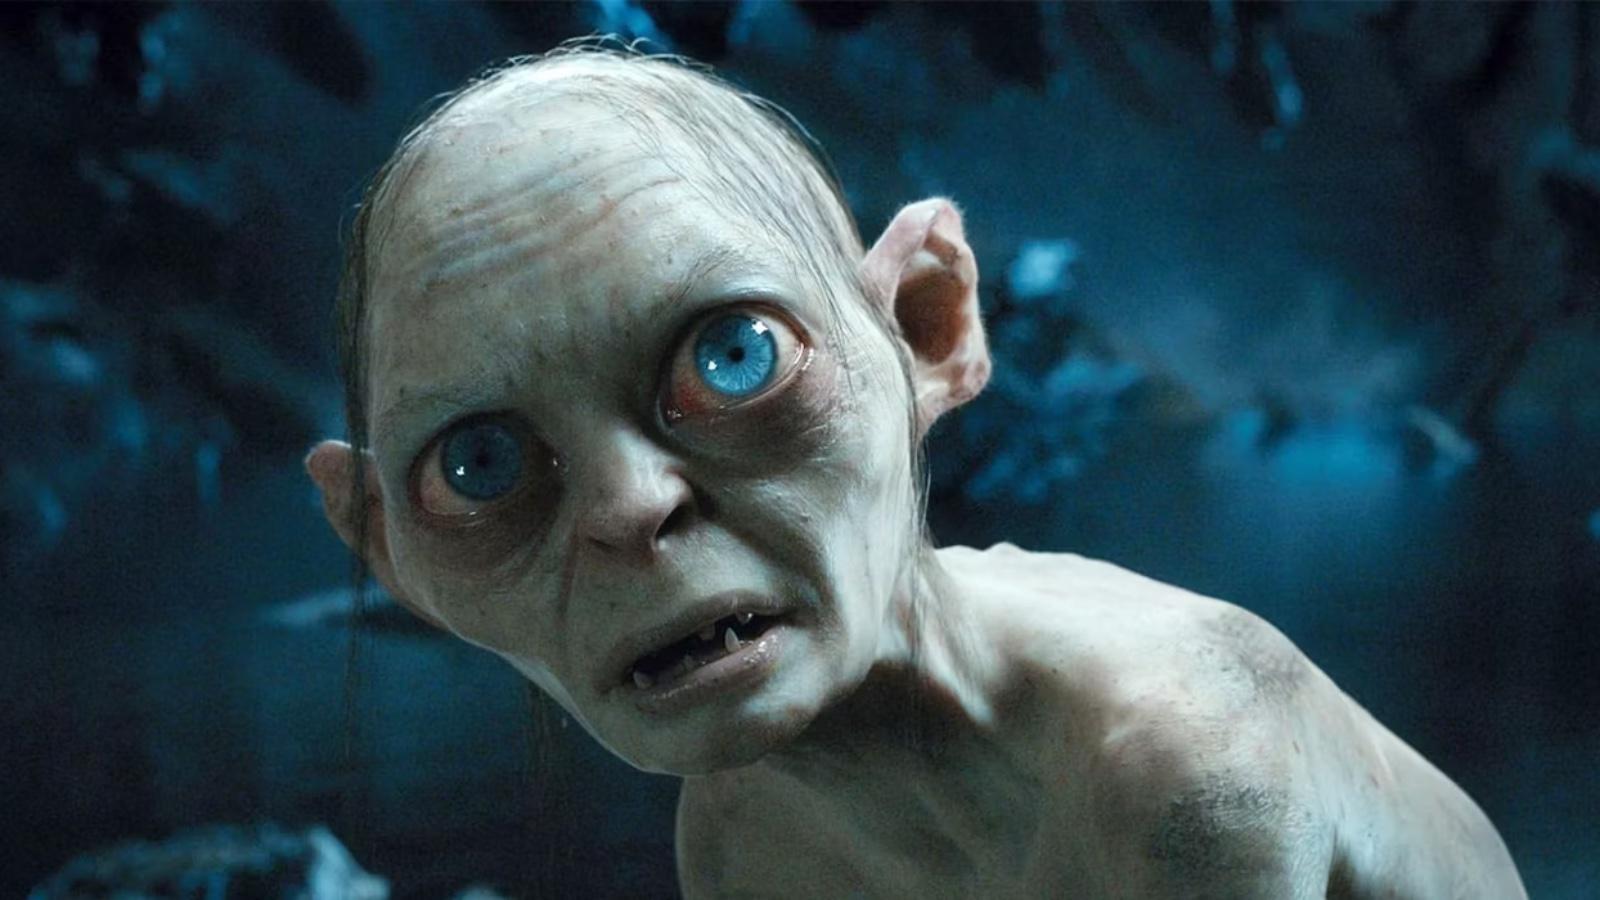 Andy Serkis Gollum in Lord of the Rings franchise.